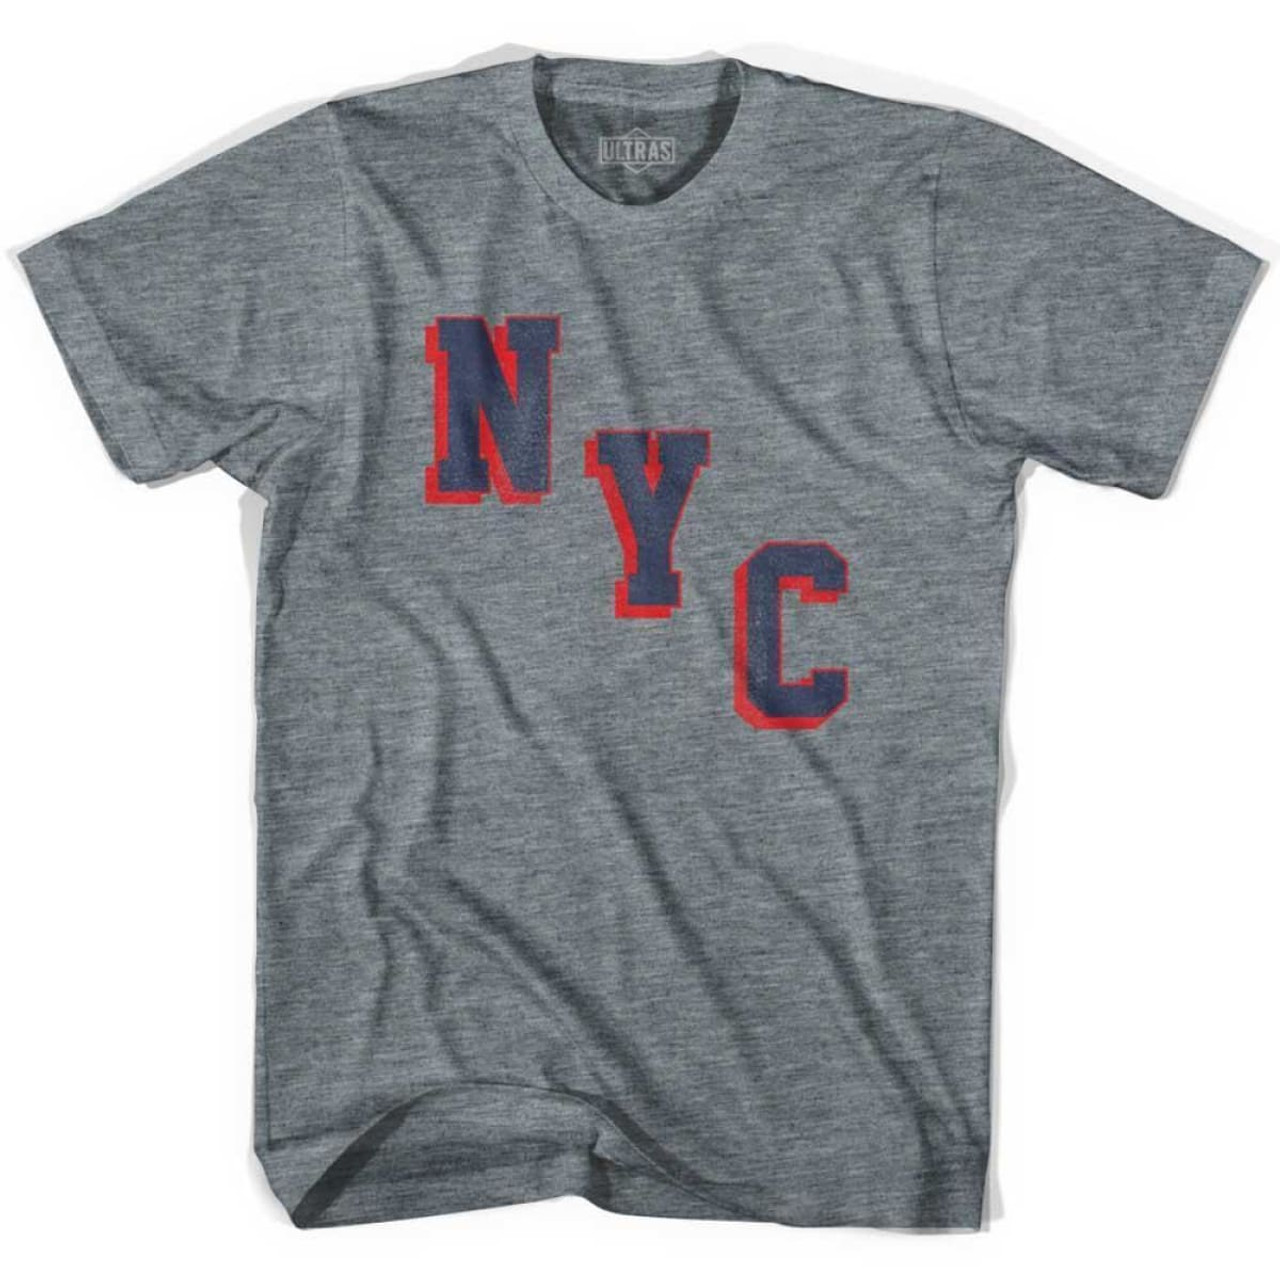 New York Black Yankees T-Shirt from Homage. | Charcoal | Vintage Apparel from Homage.